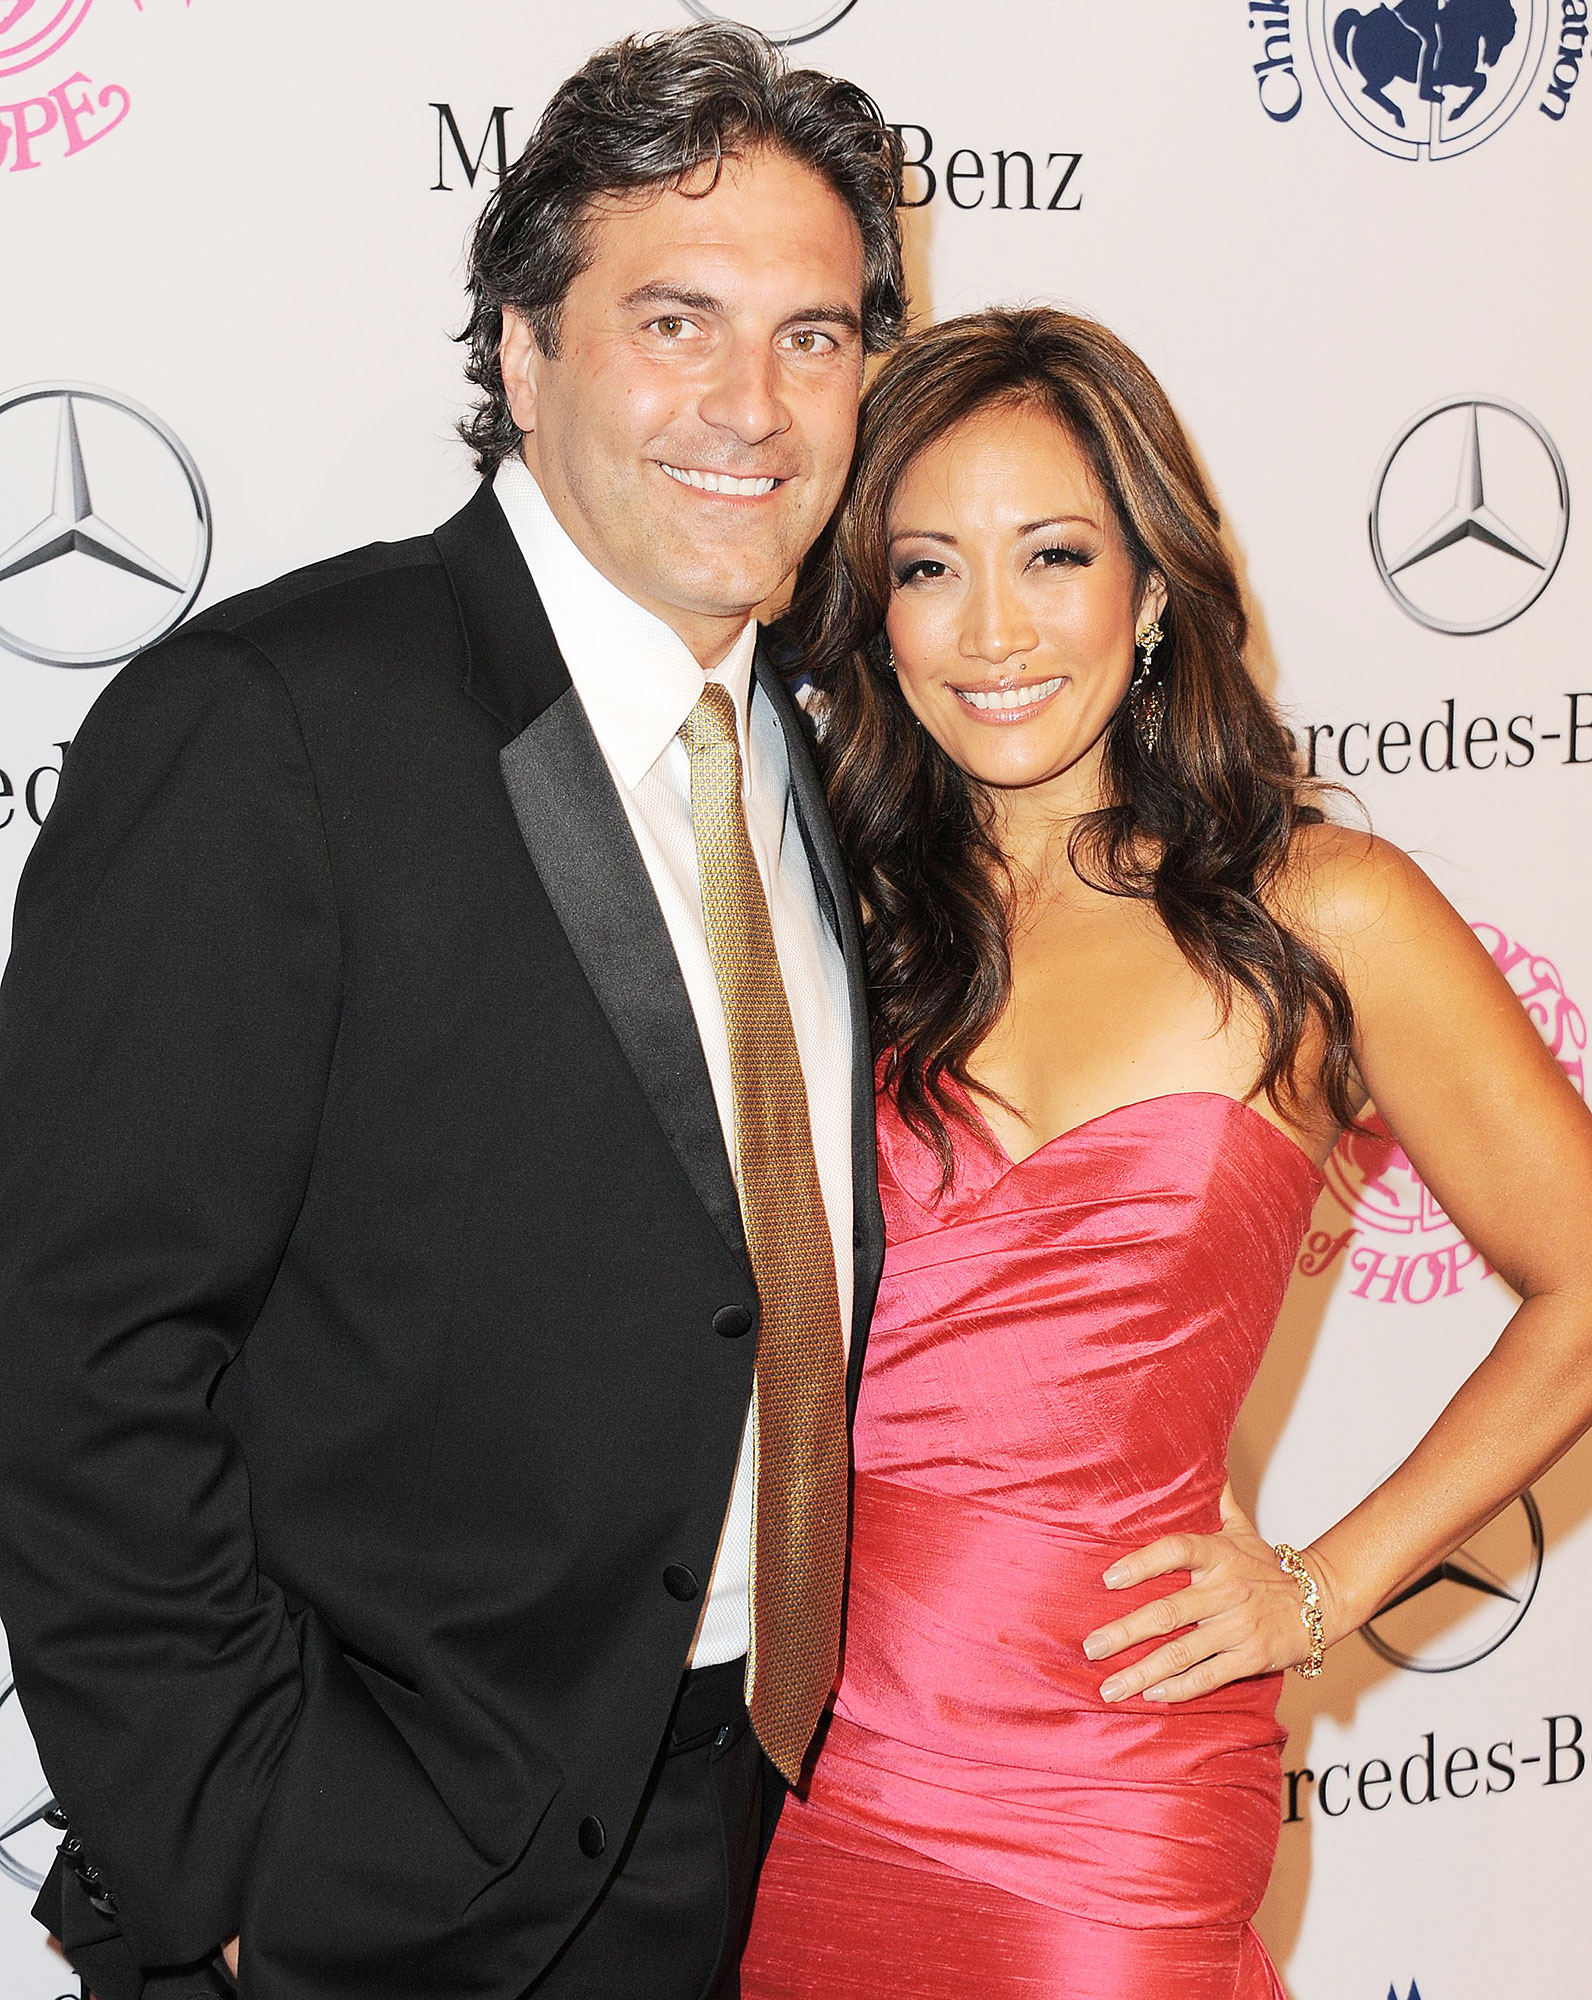 Carrie ann inaba hot